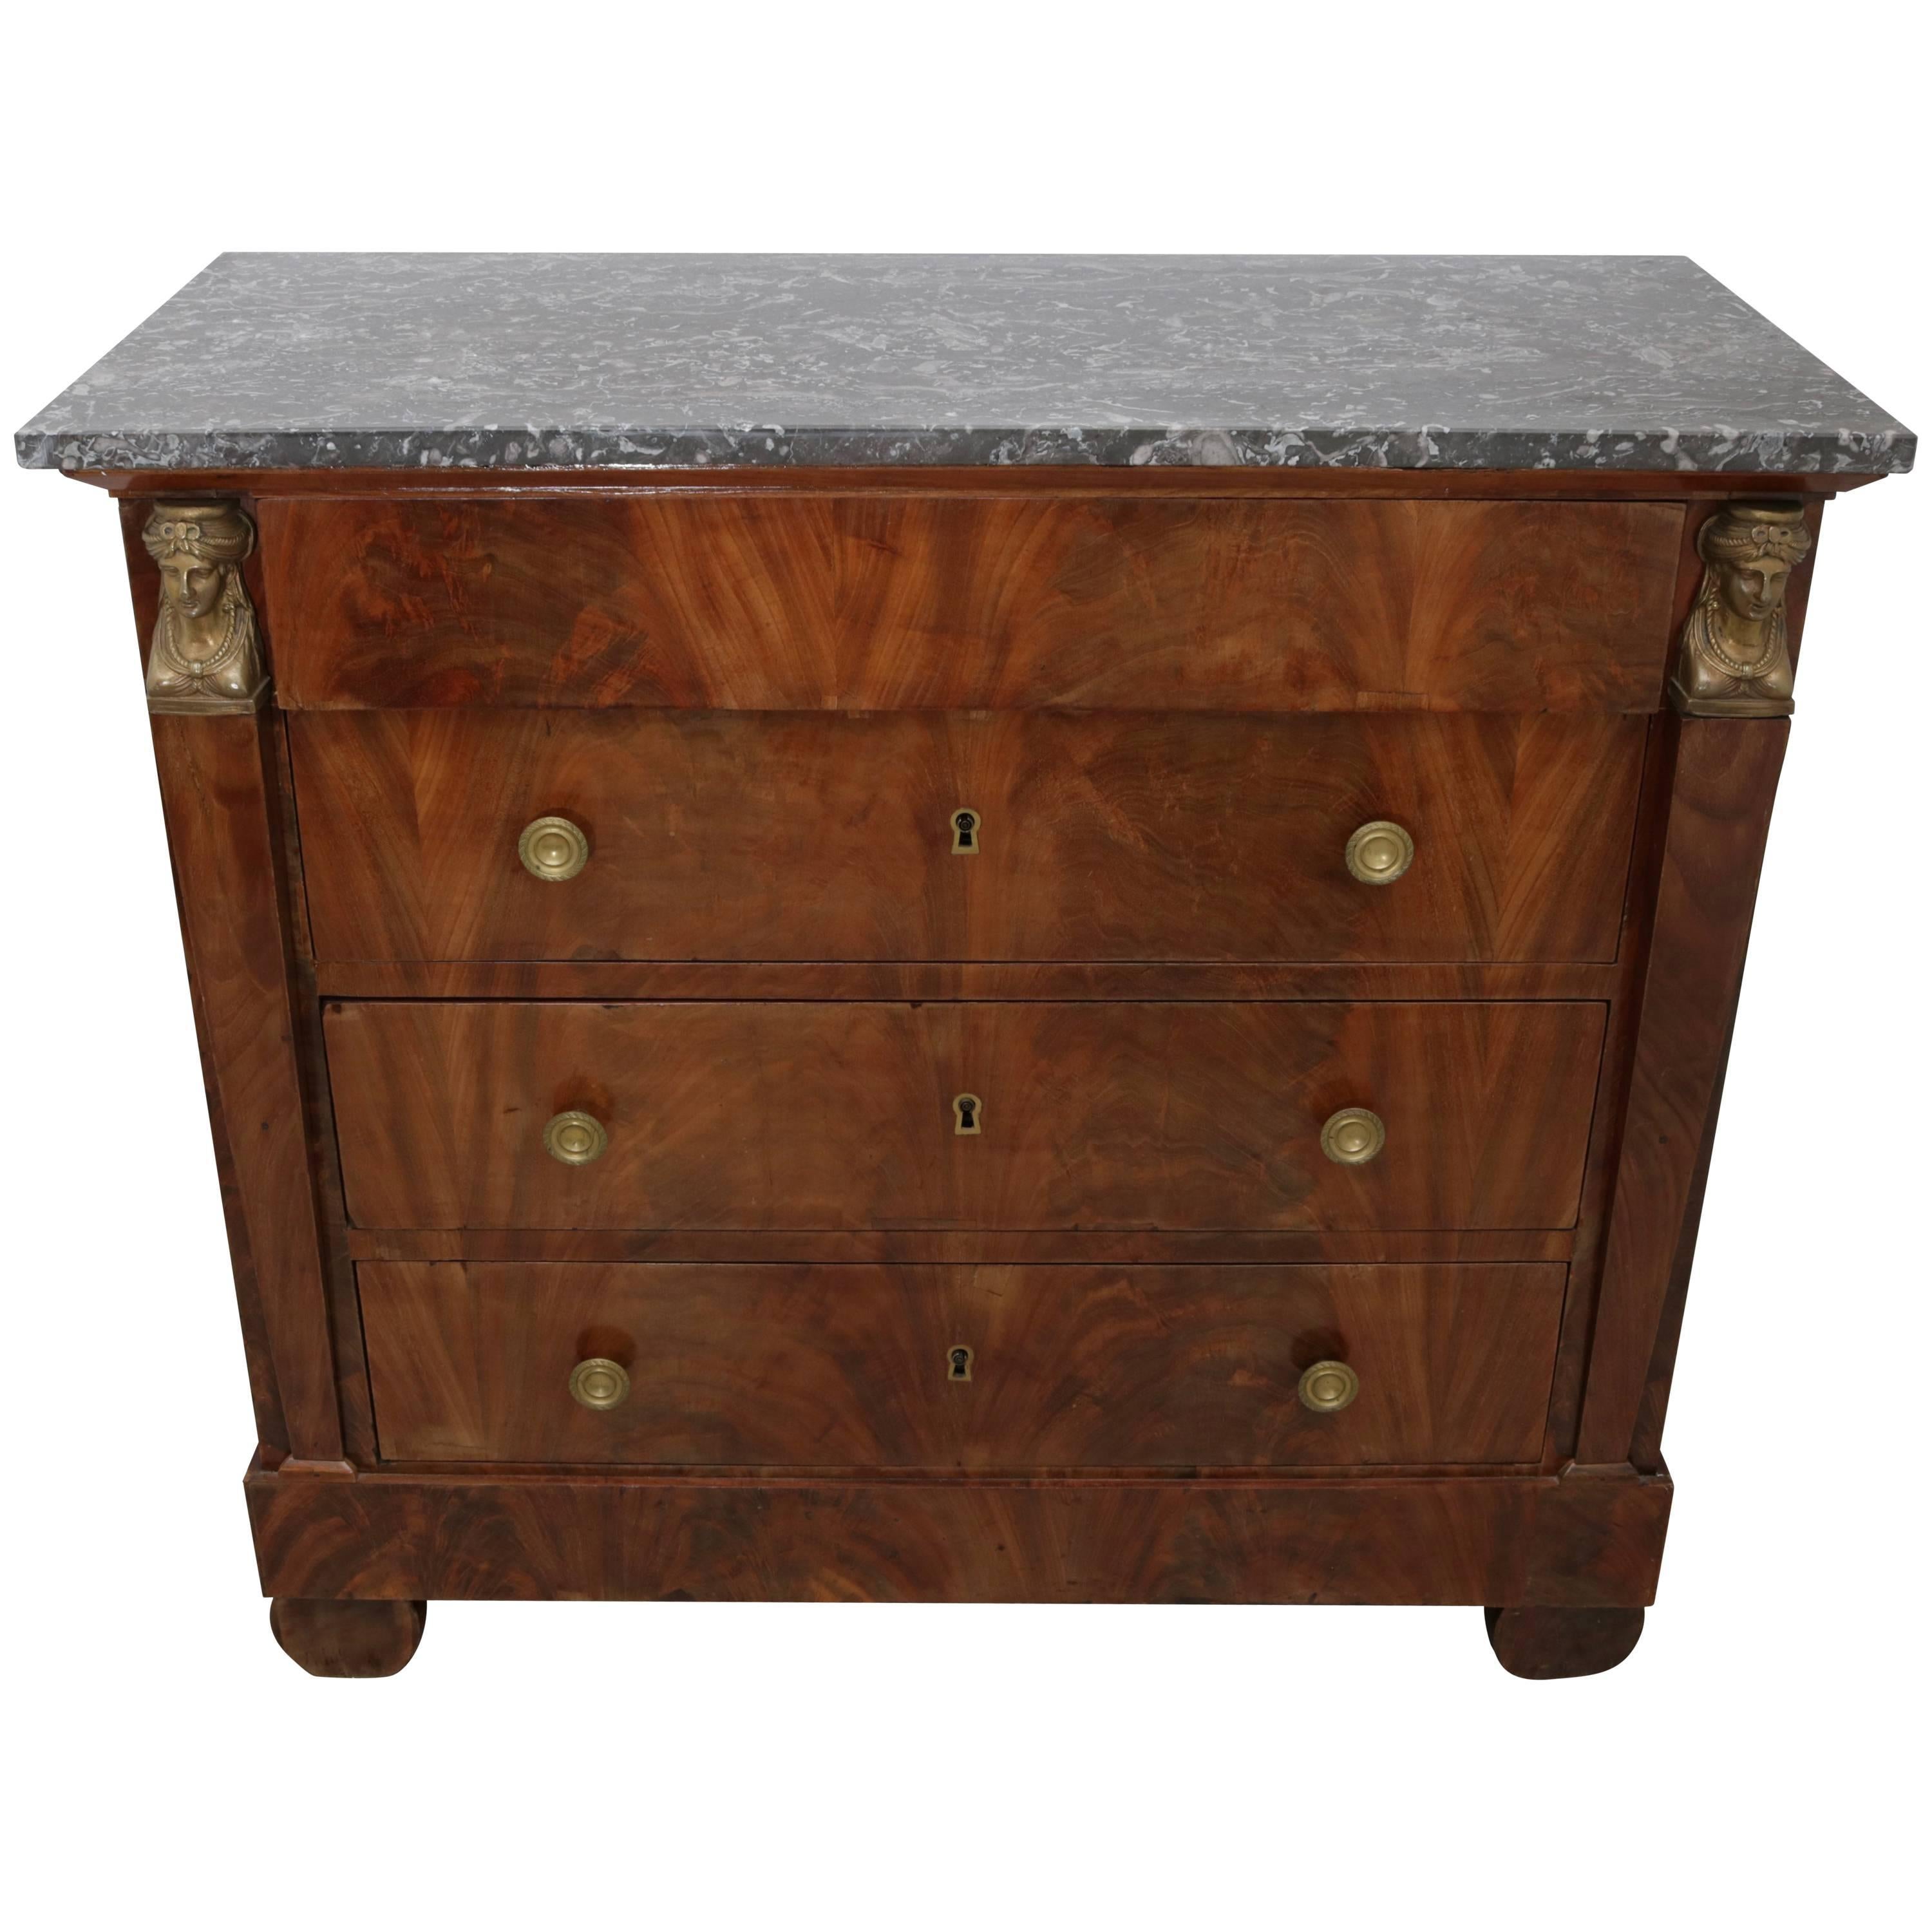 French Empire Chest of Drawers in Flame Mahogany and Marble, circa 1820s